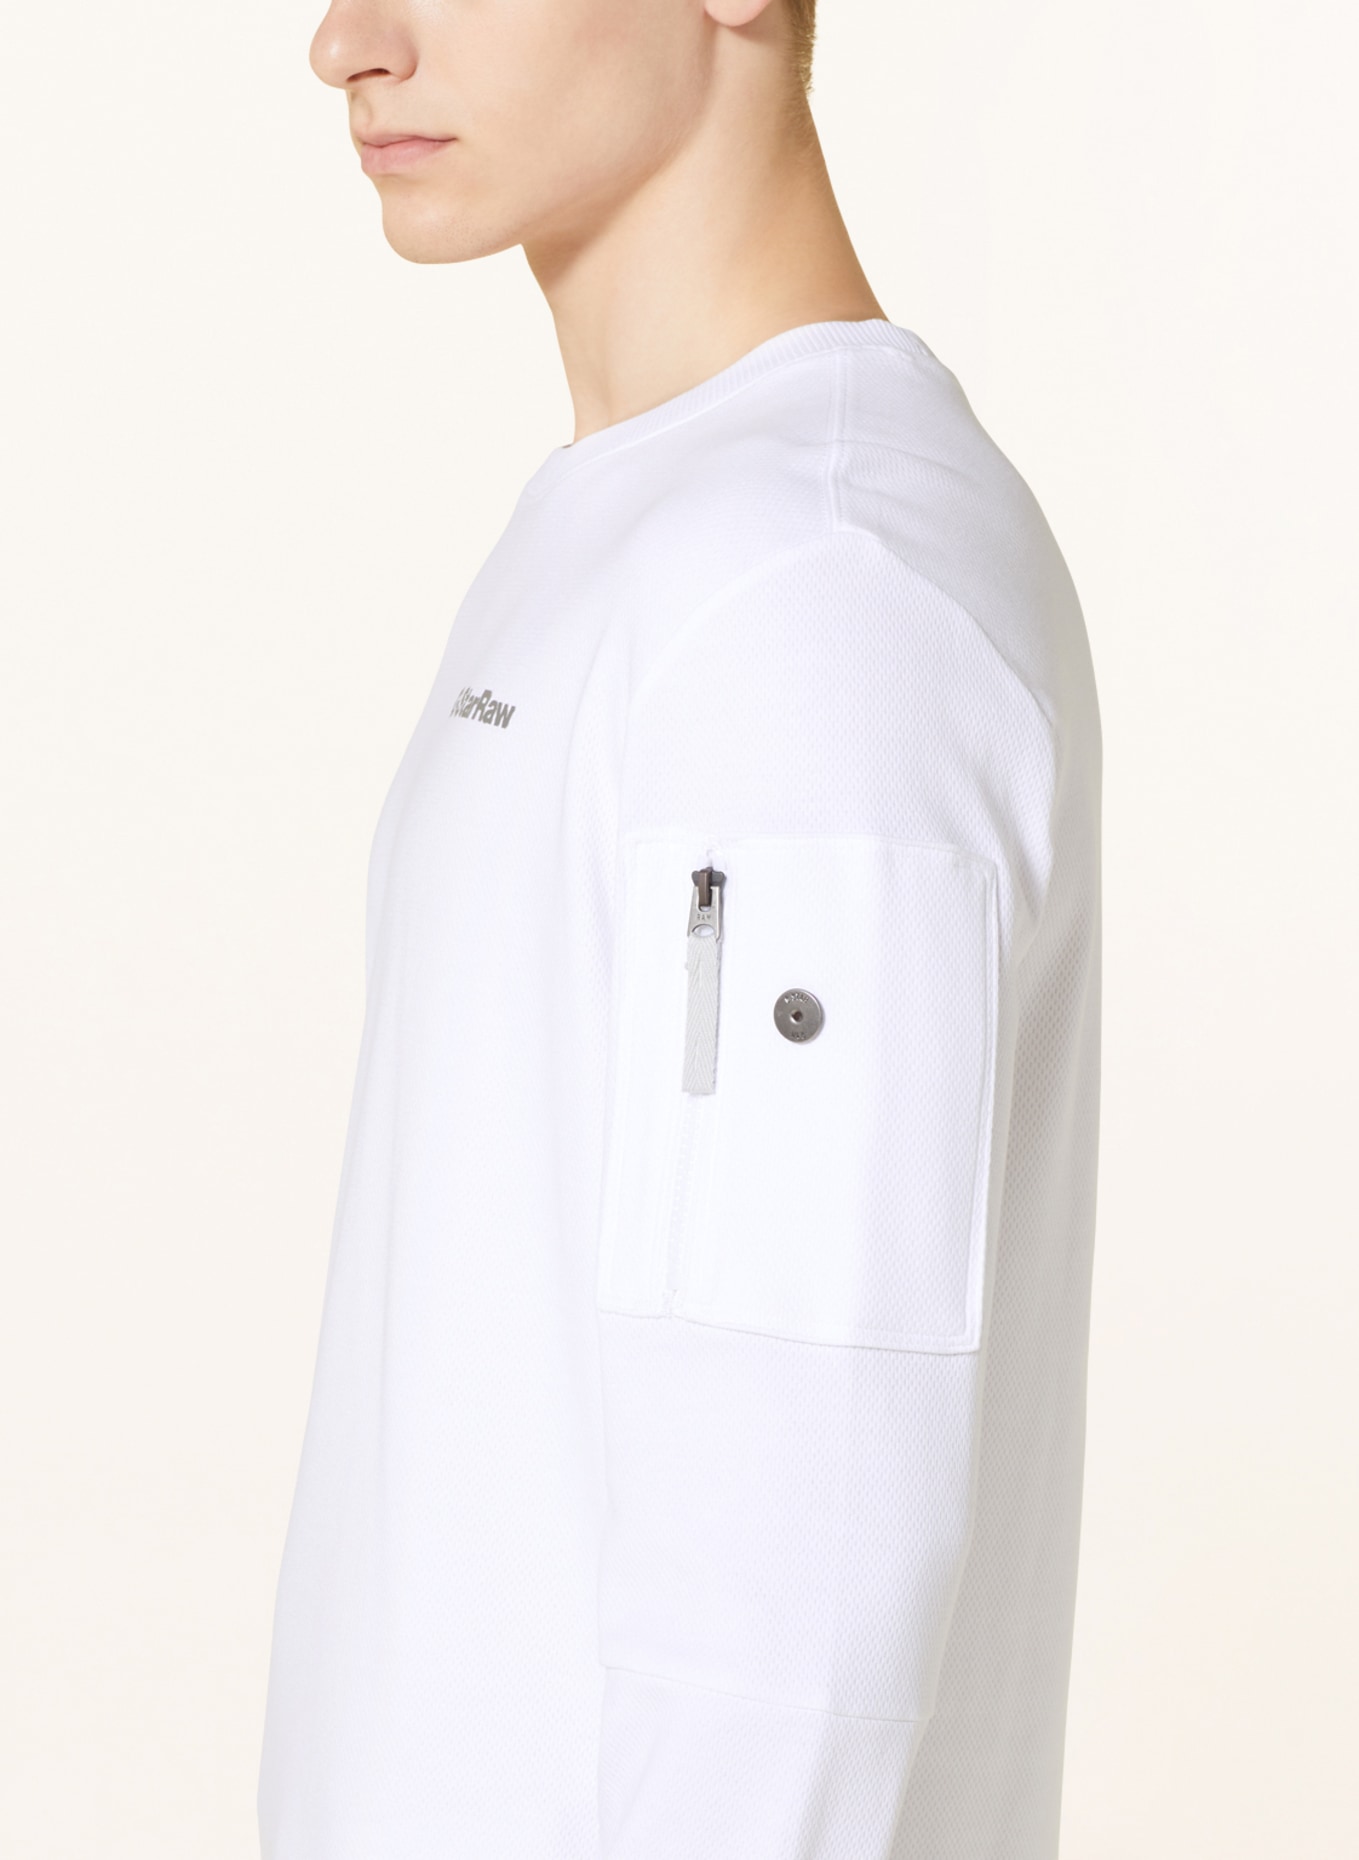 G-Star RAW Long sleeve shirt, Color: WHITE (Image 4)